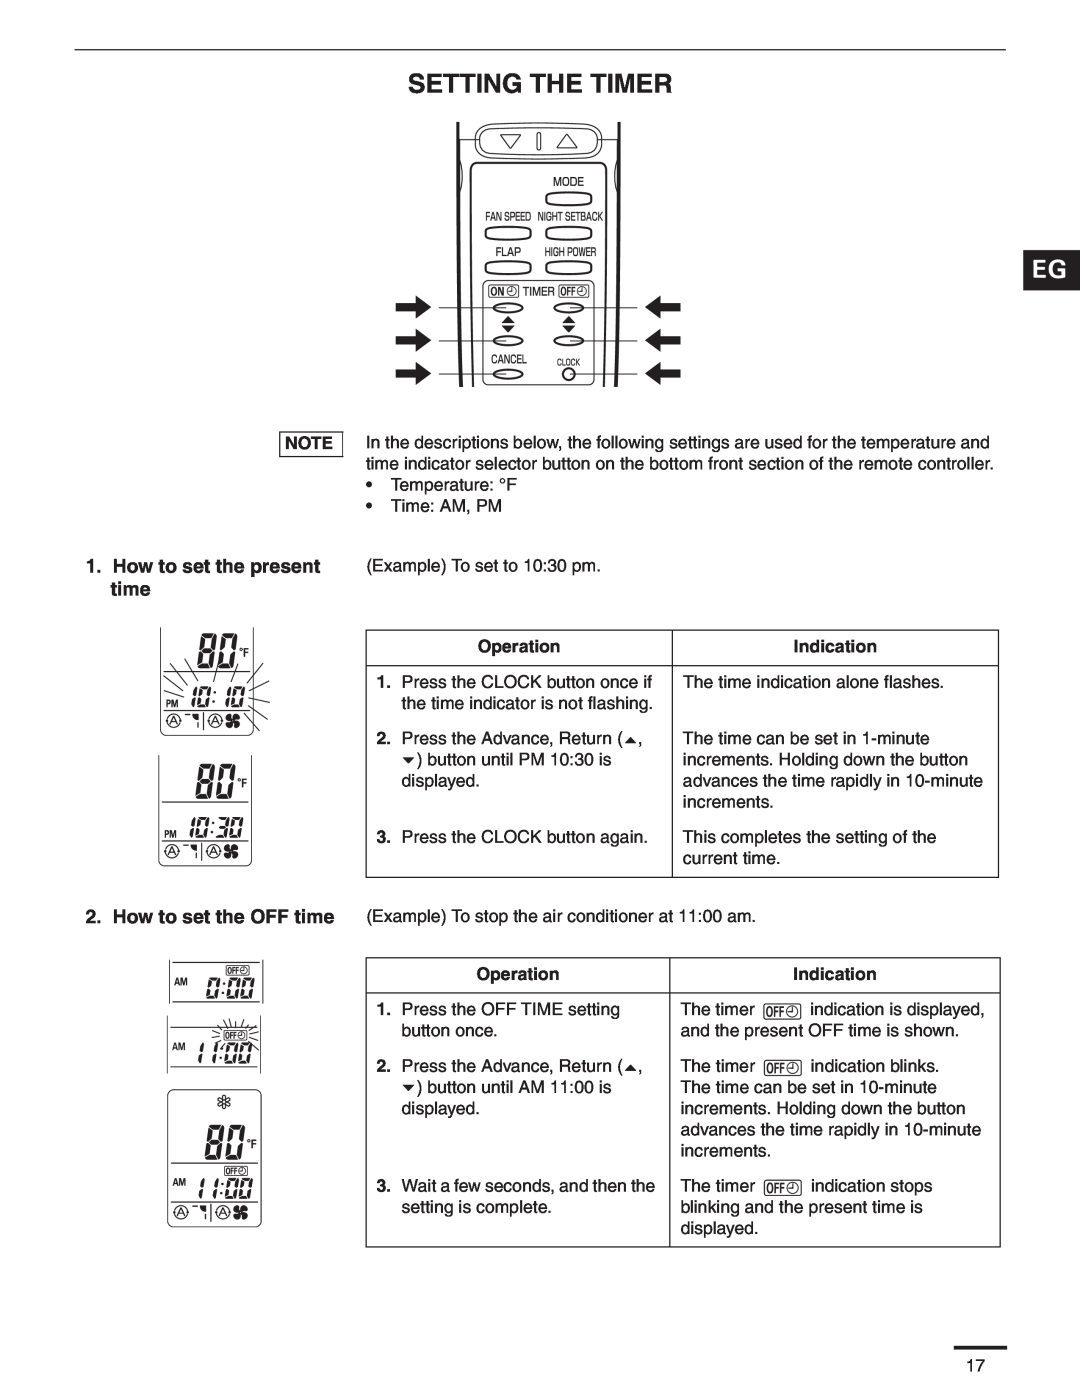 Panasonic CS-MKS12NKU, CS-MKS9NKU, CS-MKS7NKU appendix Setting The Timer, How to set the present time 